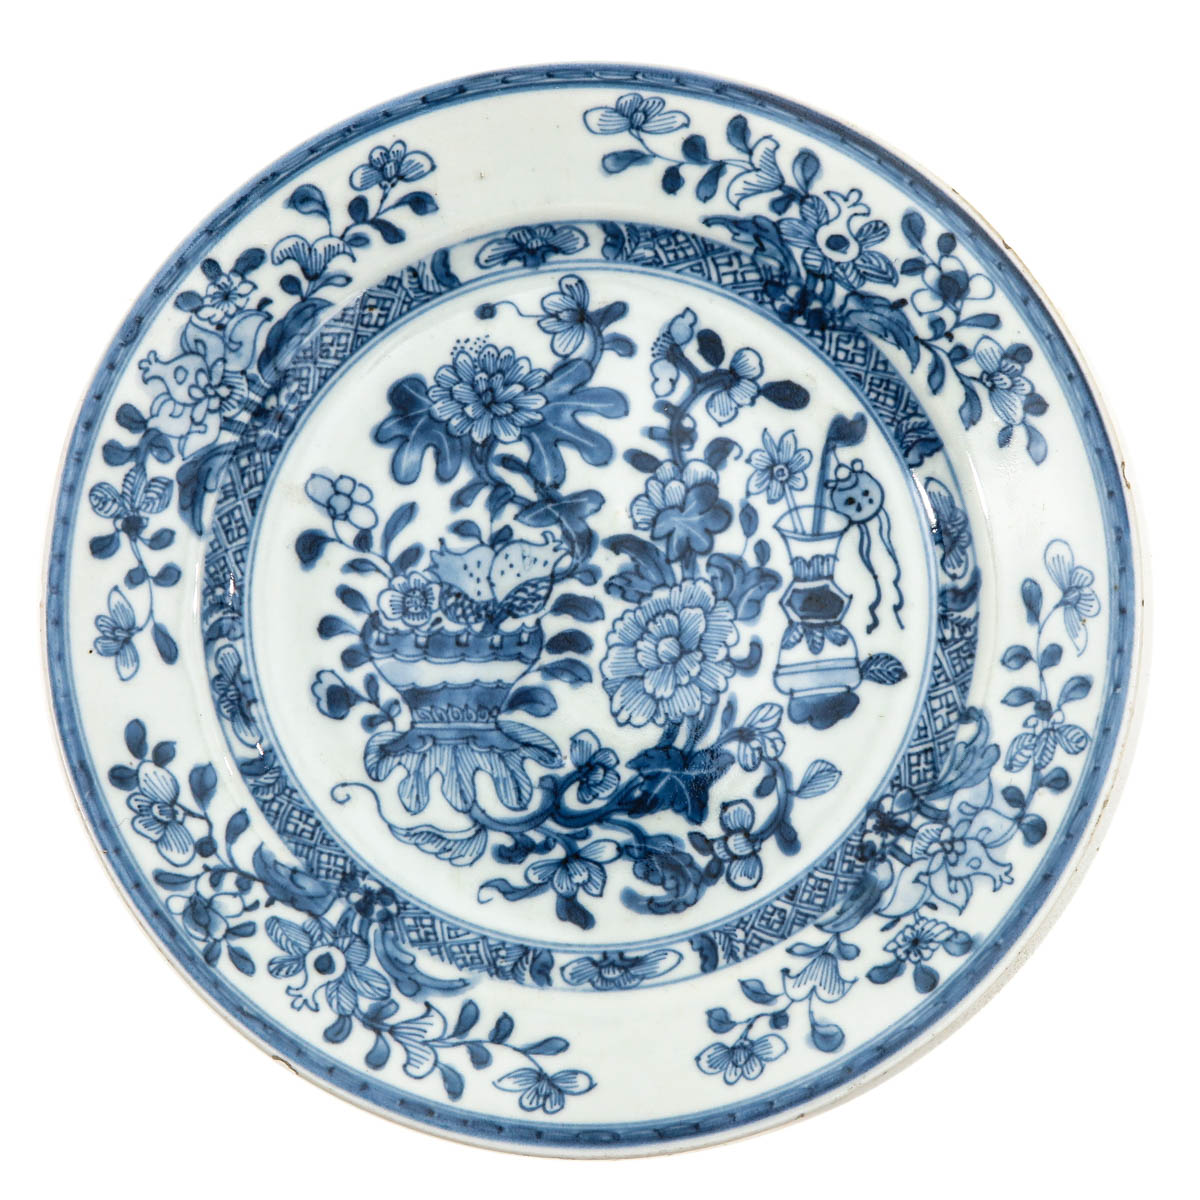 A Series of 3 Blue and White Plates - Image 3 of 10